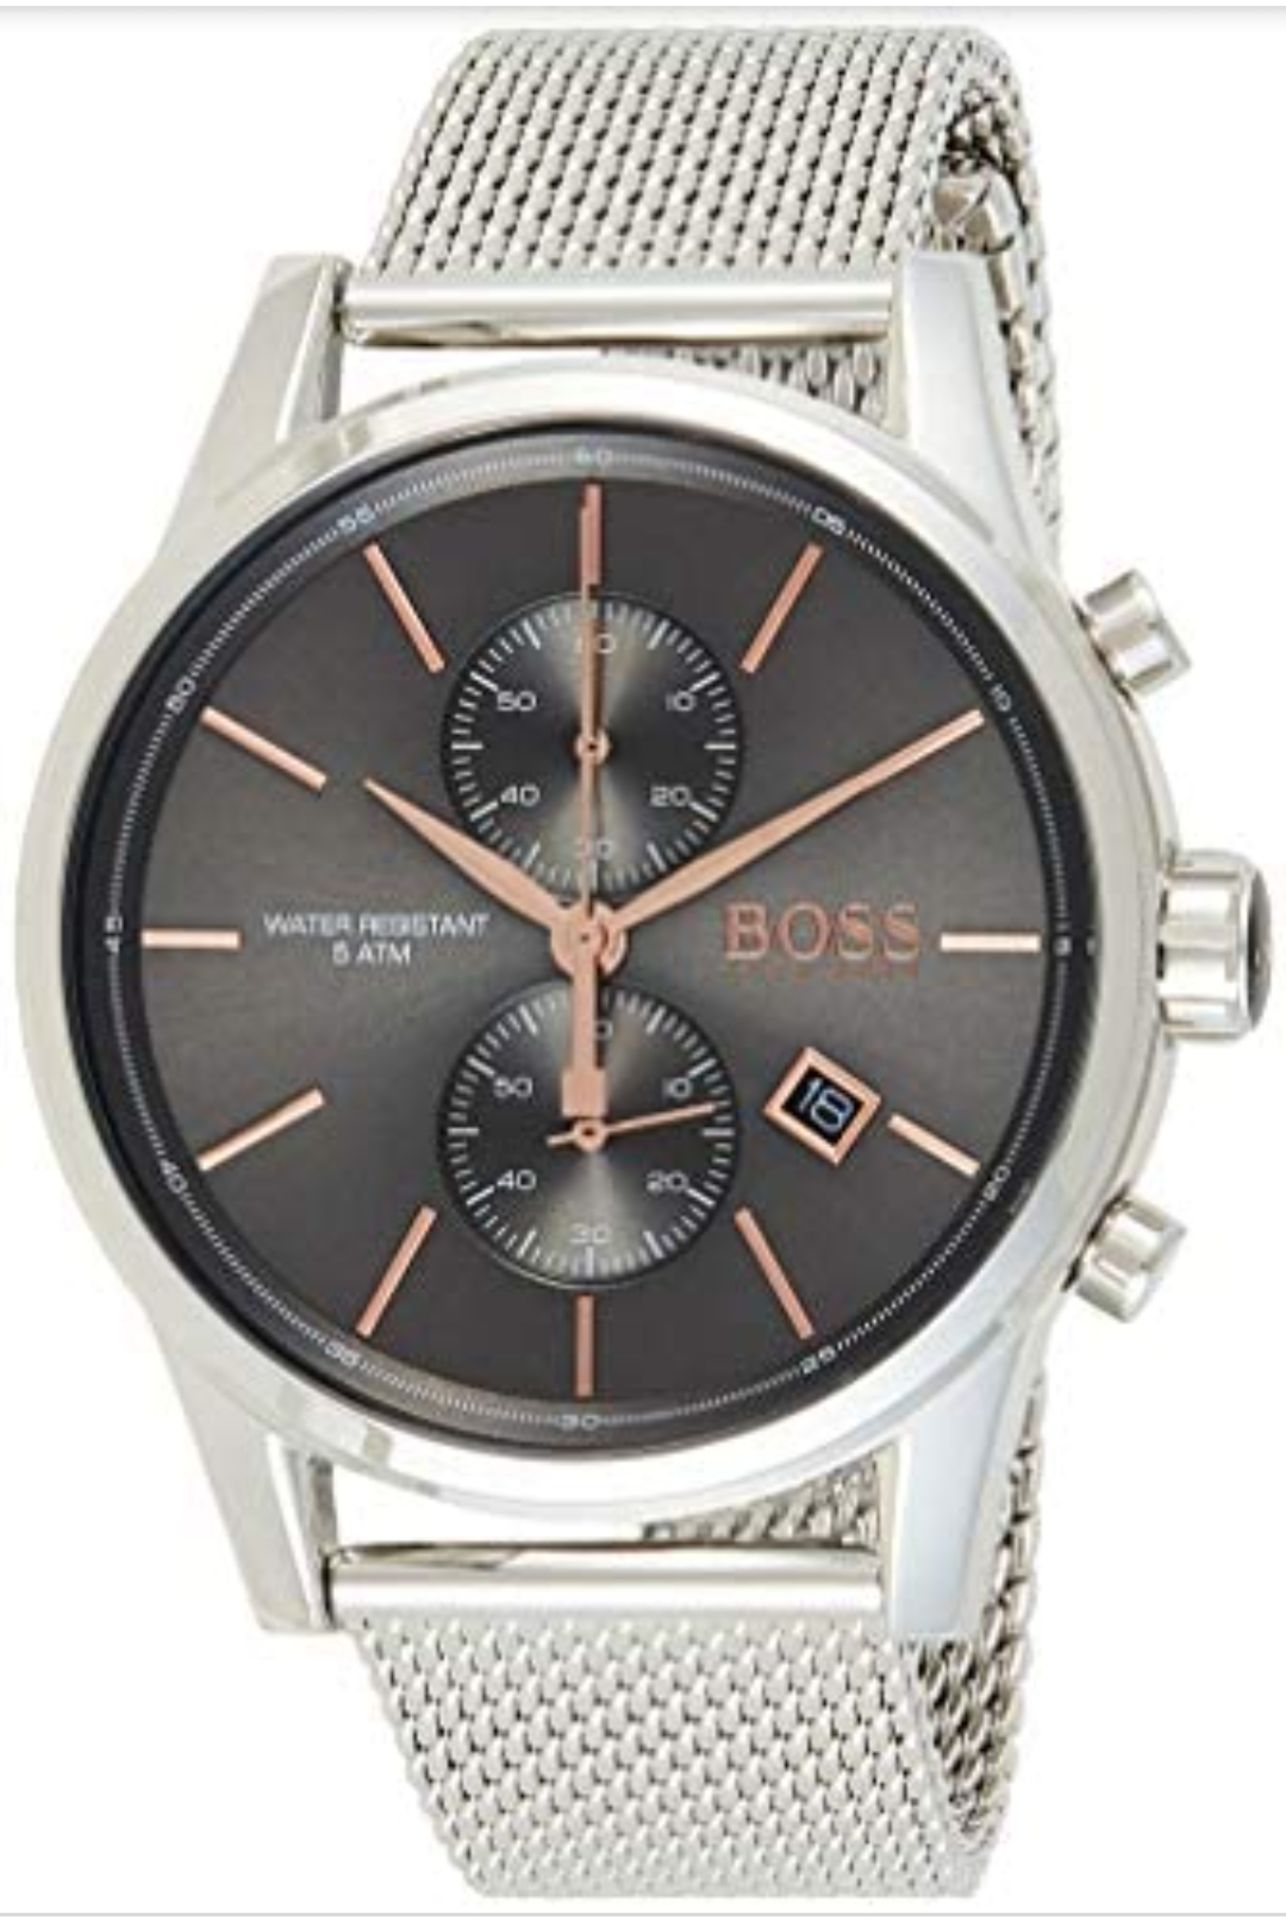 Hugo Boss Trade Lot 1C. A Total Of 20 Brand New Hugo Boss Watches - Image 9 of 20